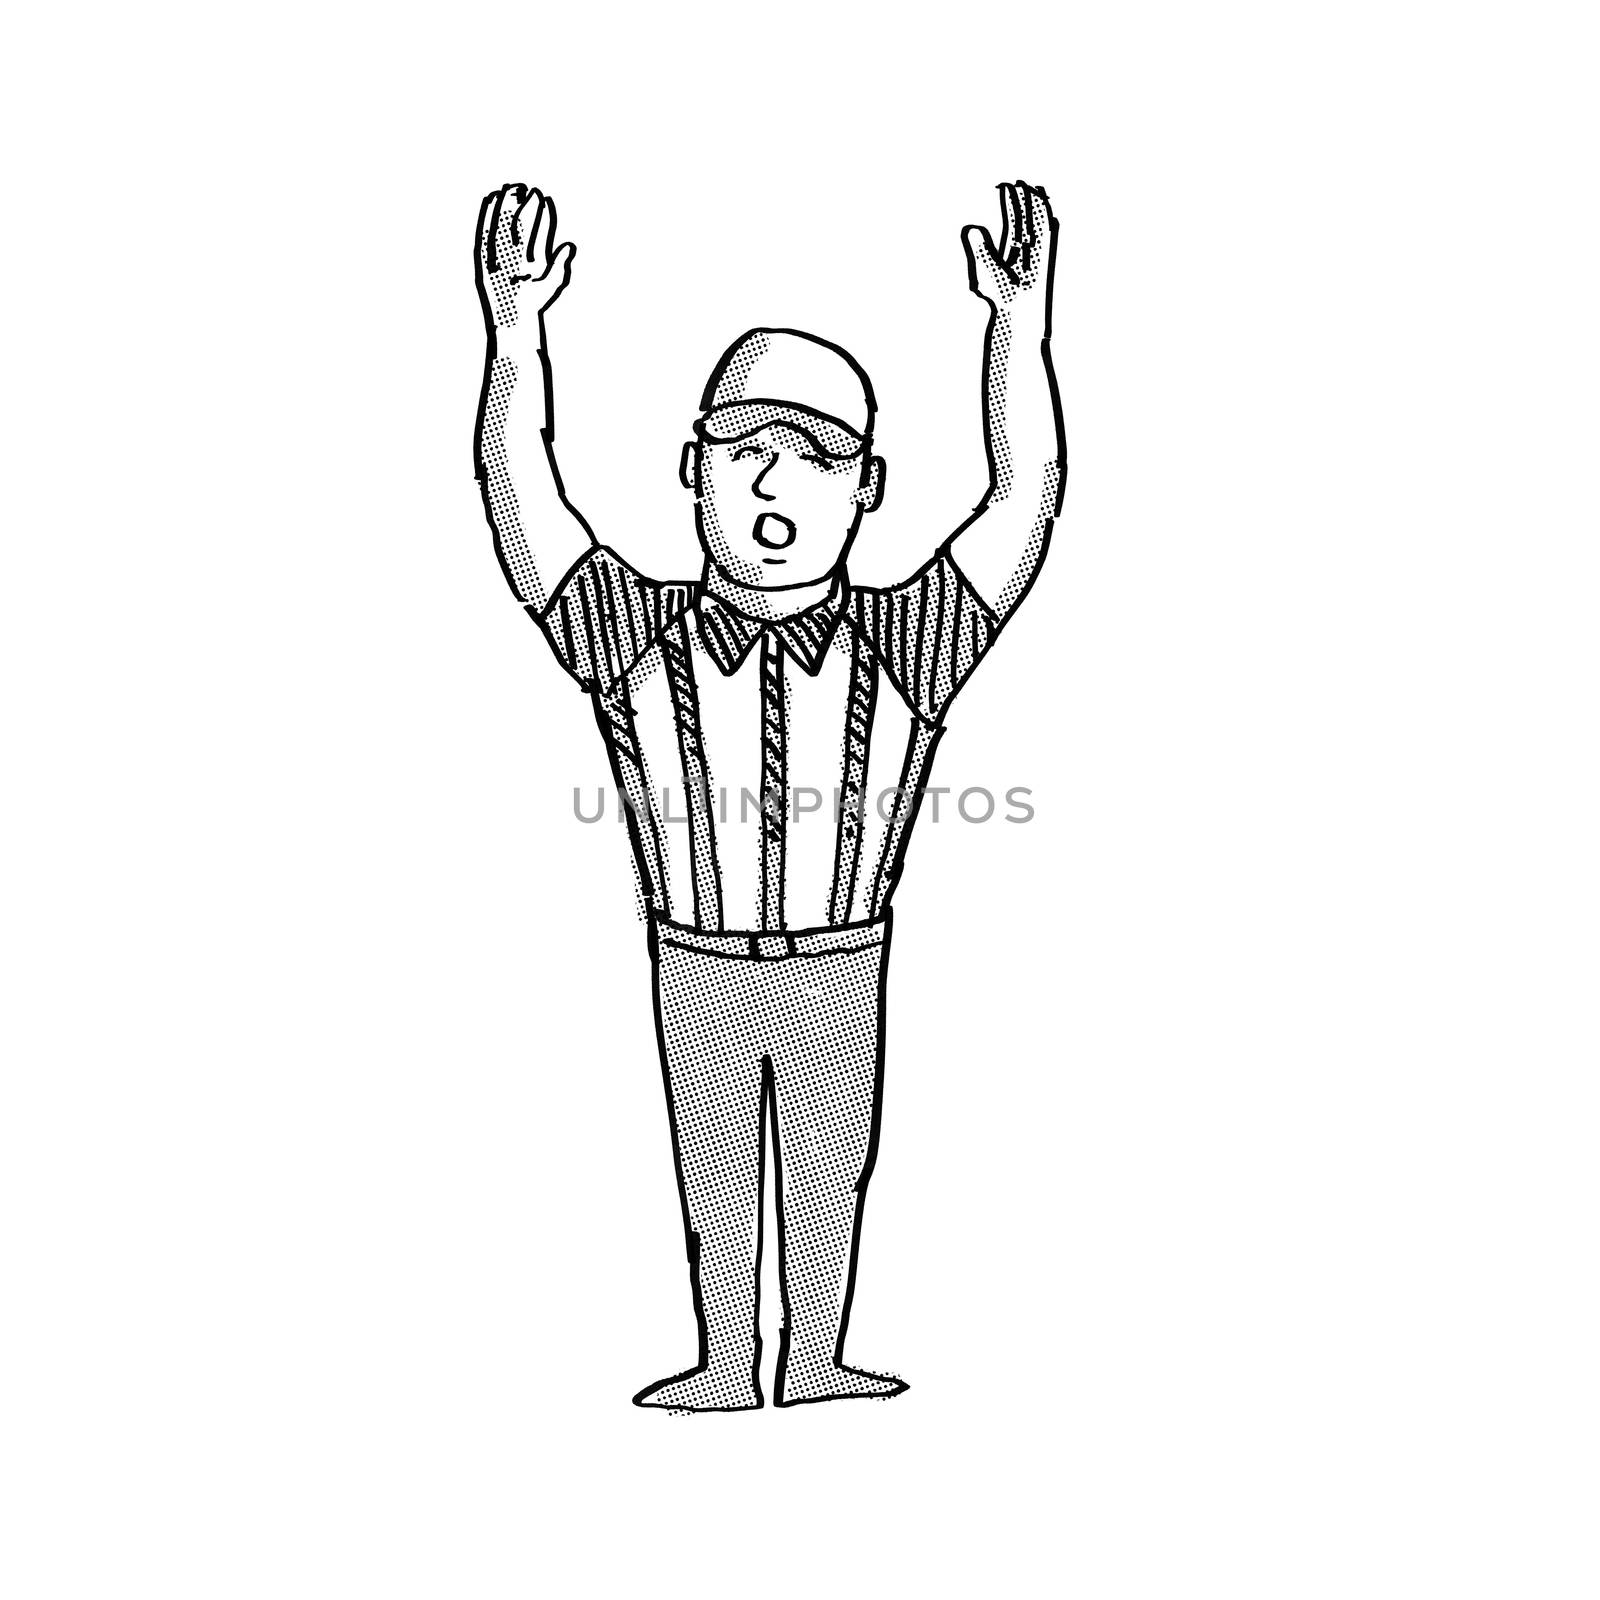 Cartoon style illustration of an American football official or referee done in black and white on isolated white background